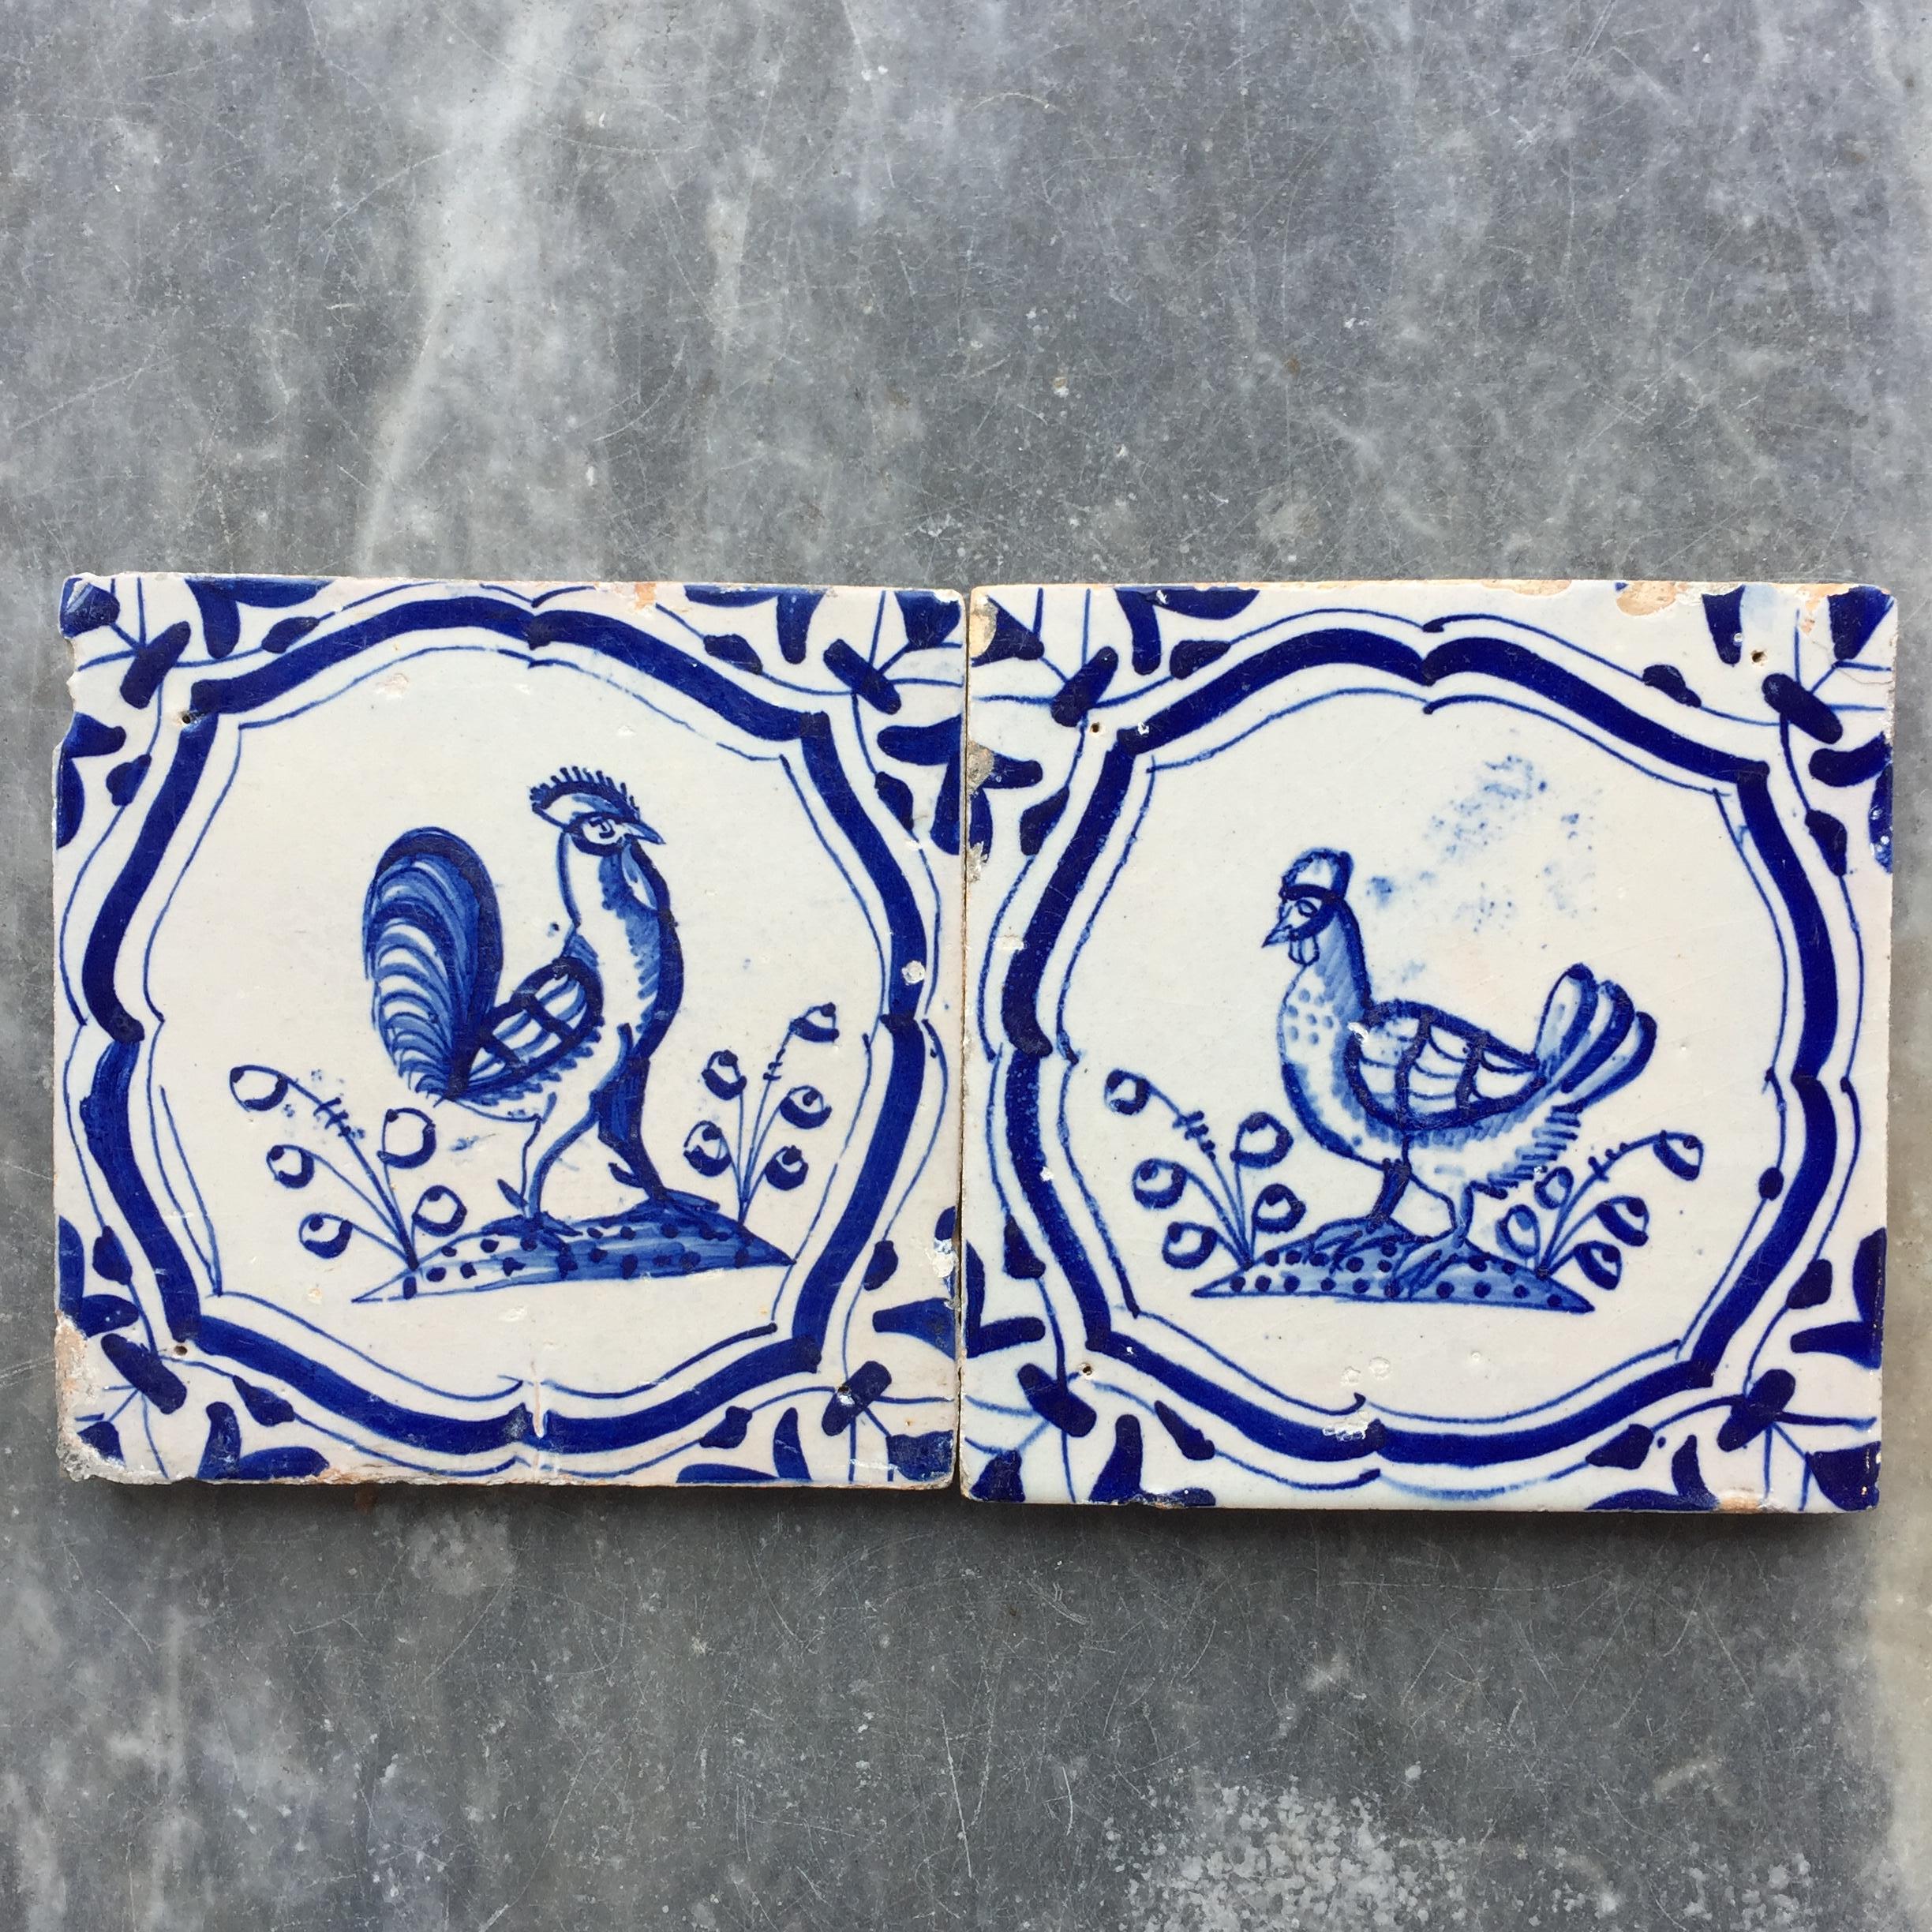 The Netherlands
Rotterdam
Circa 1625 - 1650

A nice set of two Dutch tiles with fine decoration of a tough rooster and a chicken between two plants.
Painted within an accolade border and with a superb clear glaze.

A genuine collectible of